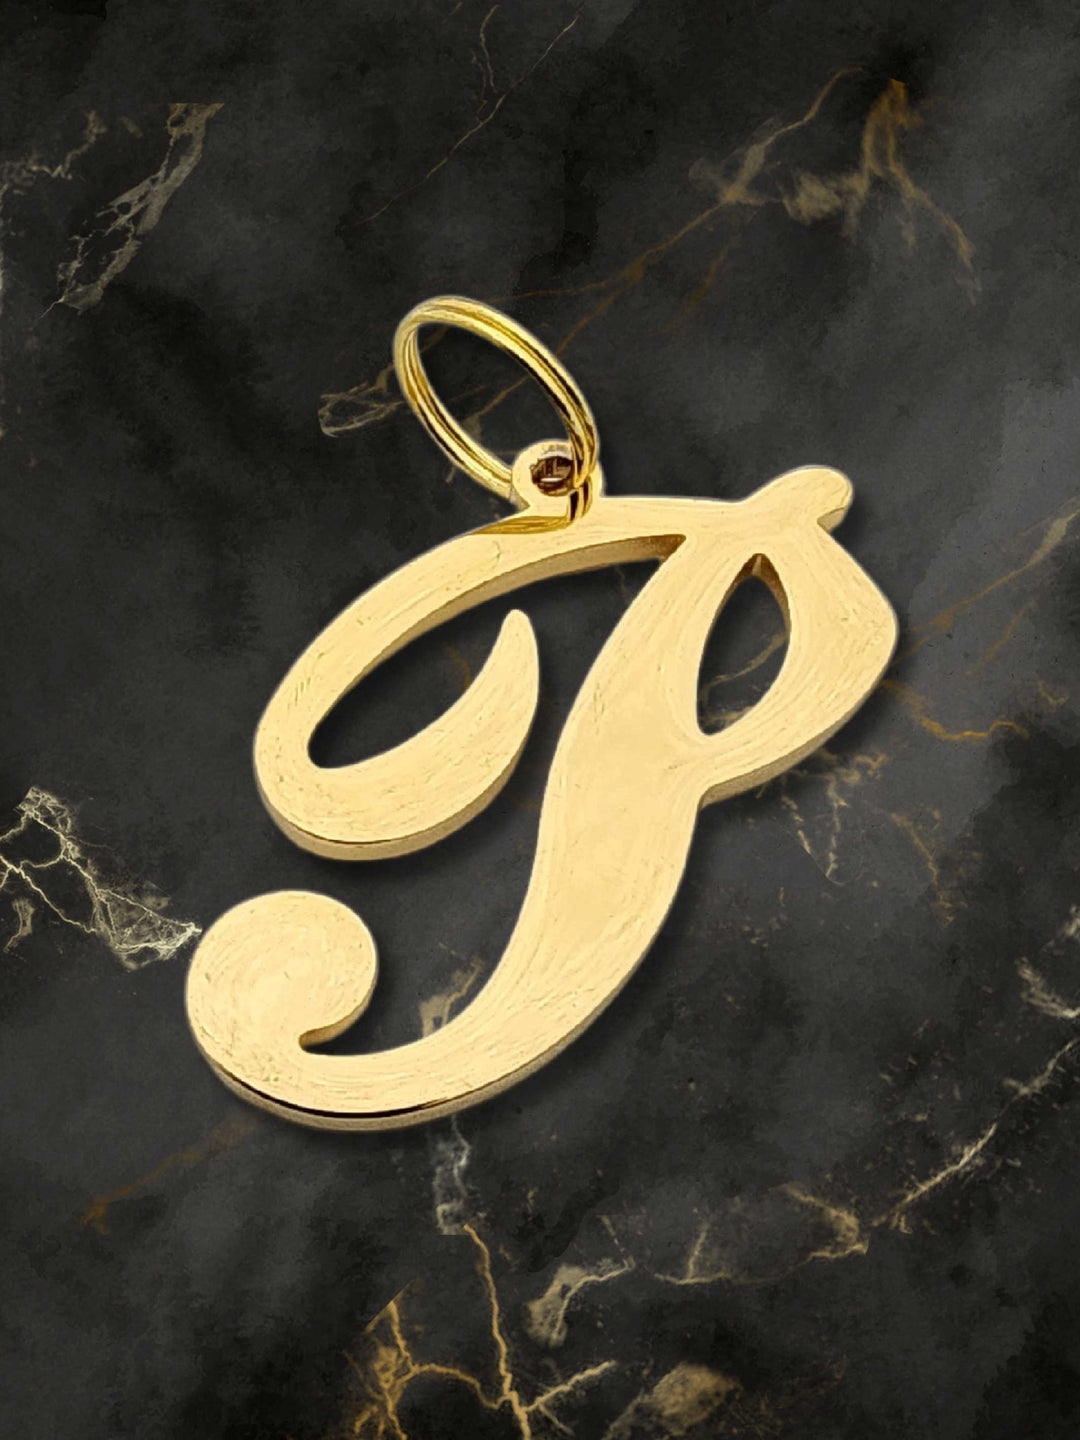  Gold initial letter pendant jewelry tag for dogs, pet ID tag for small and big dogs, bling for dogs, charms for dogs